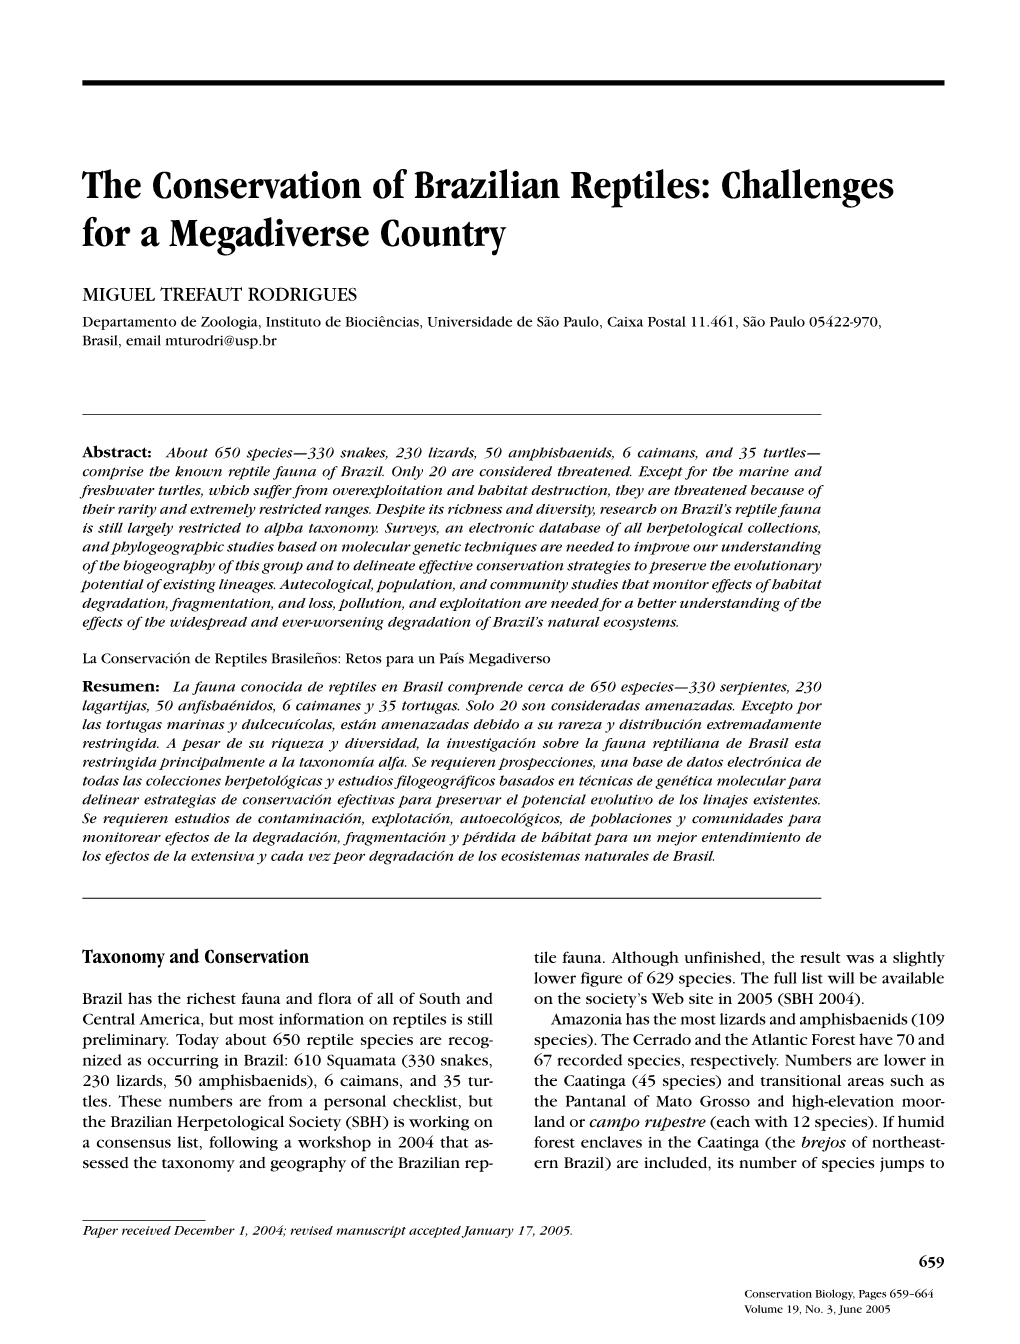 The Conservation of Brazilian Reptiles: Challenges for a Megadiverse Country